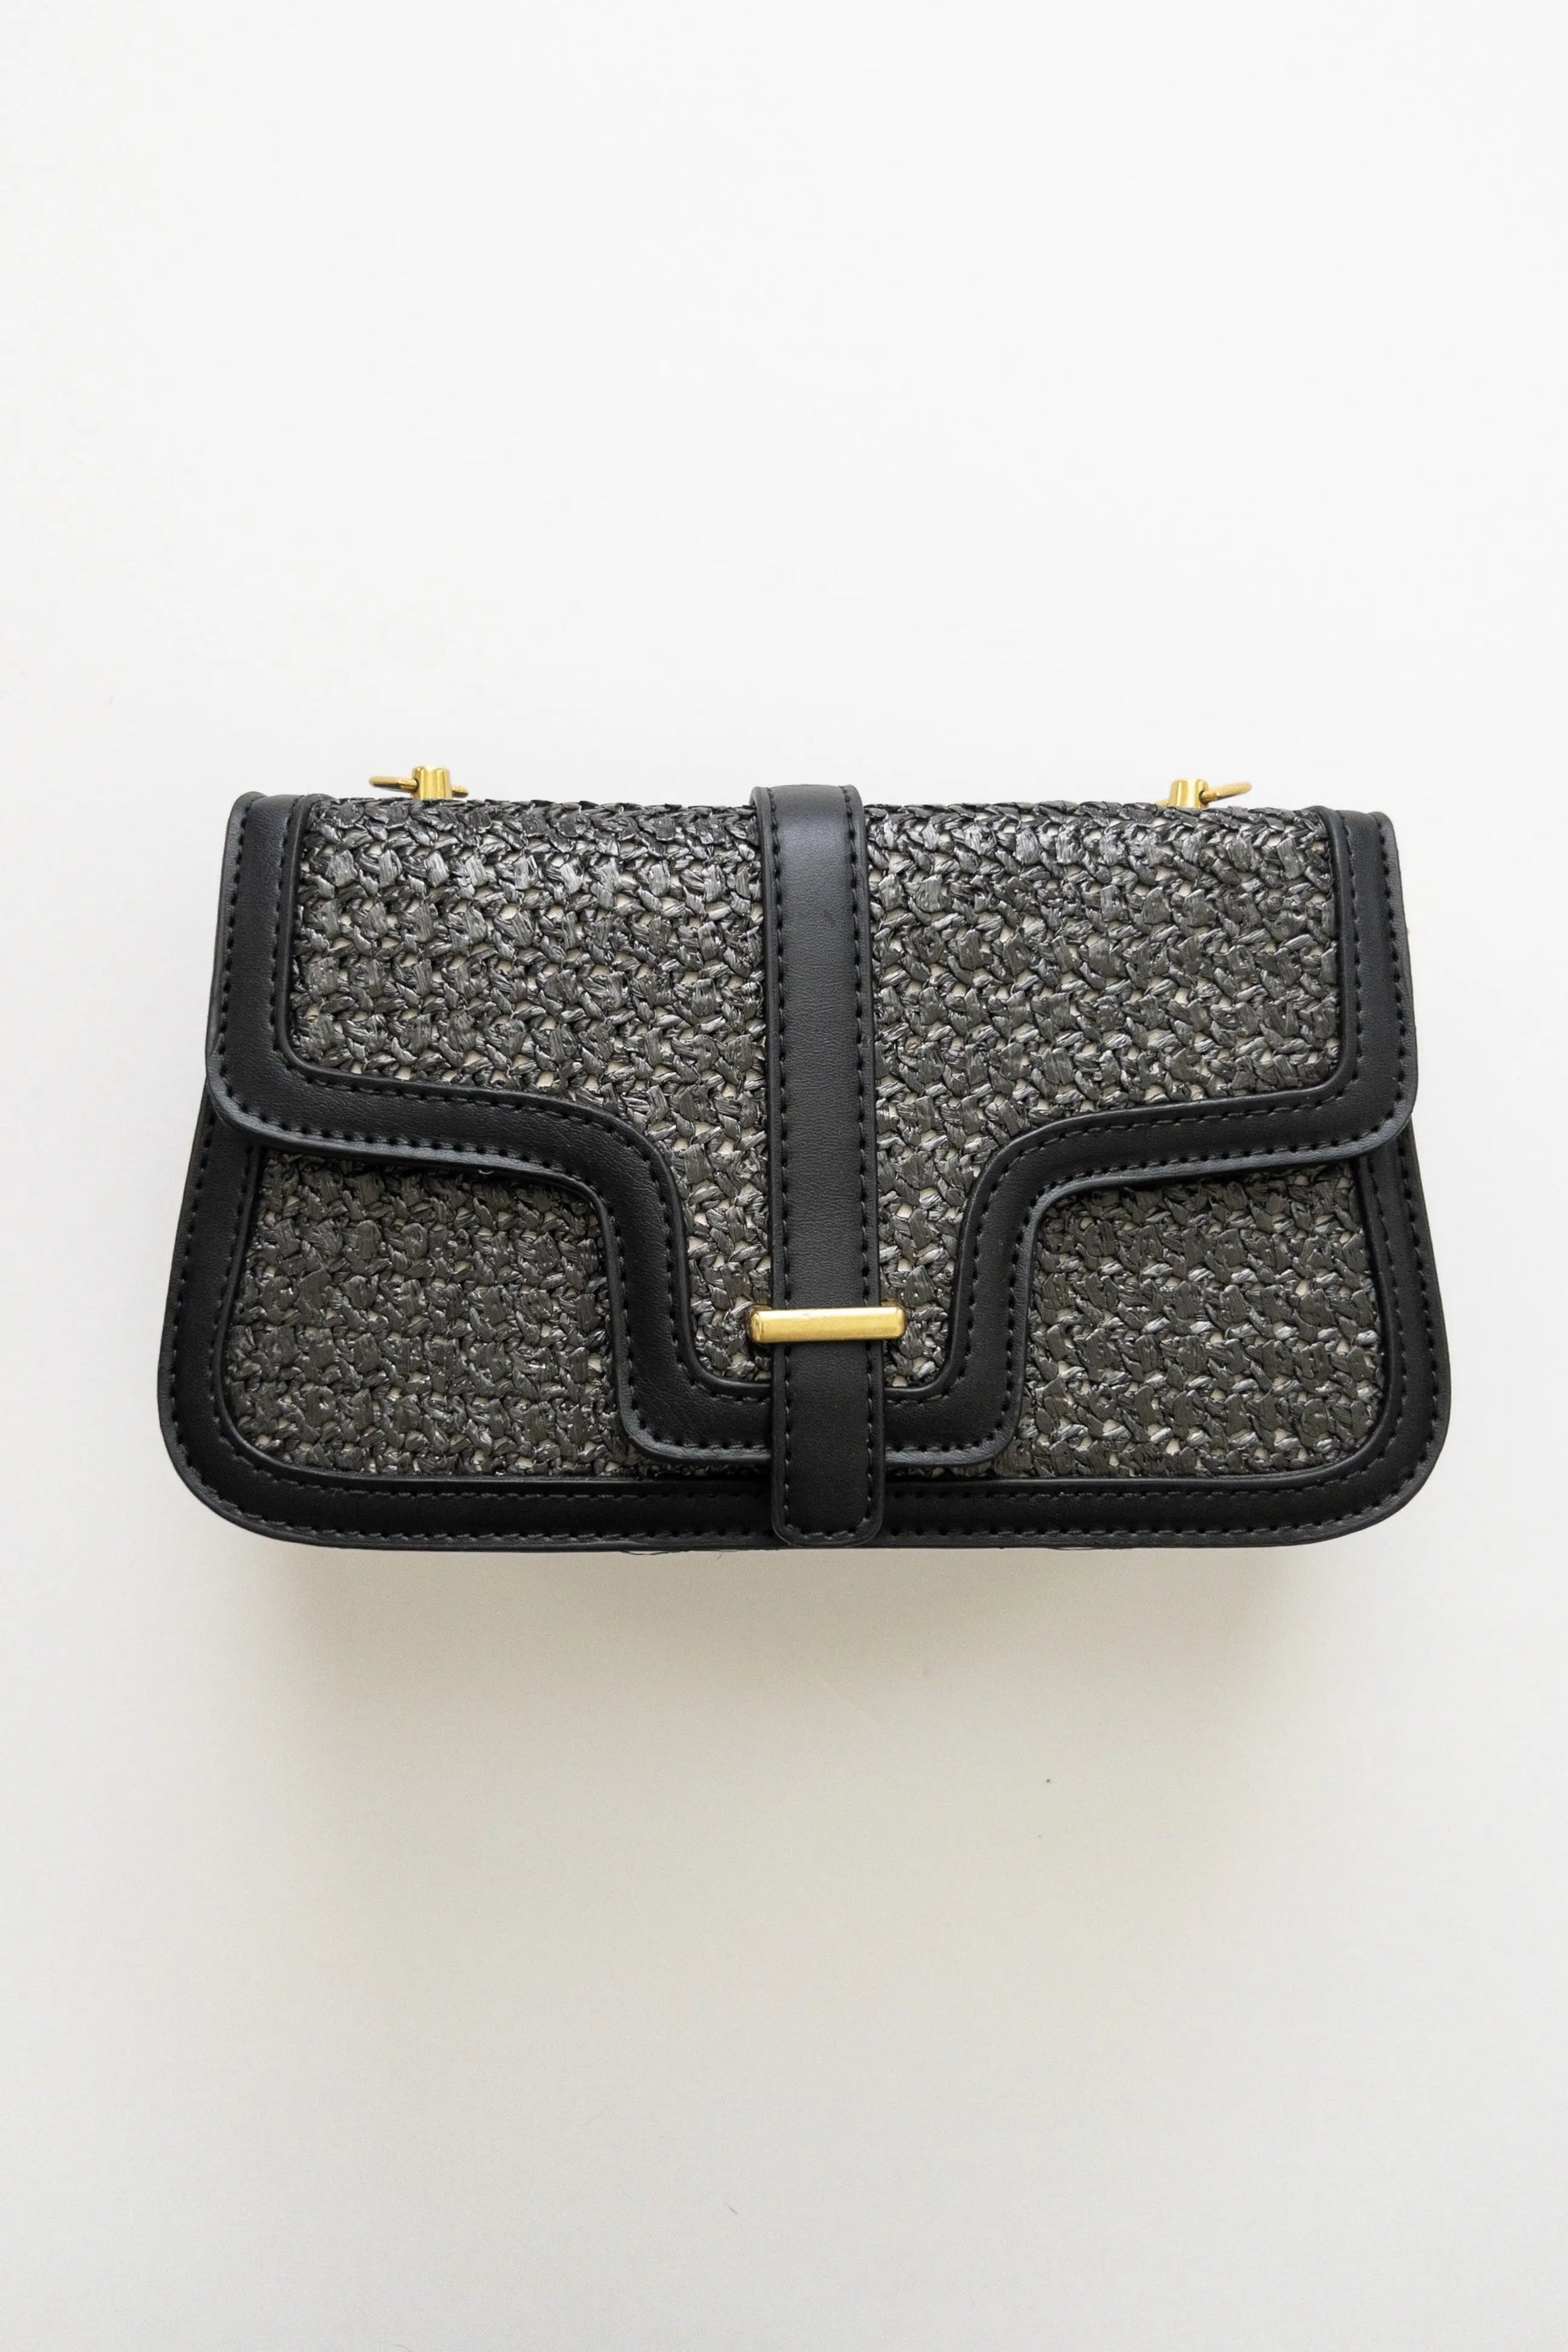 The Tiny Details Gracie Straw Leather Black Purse